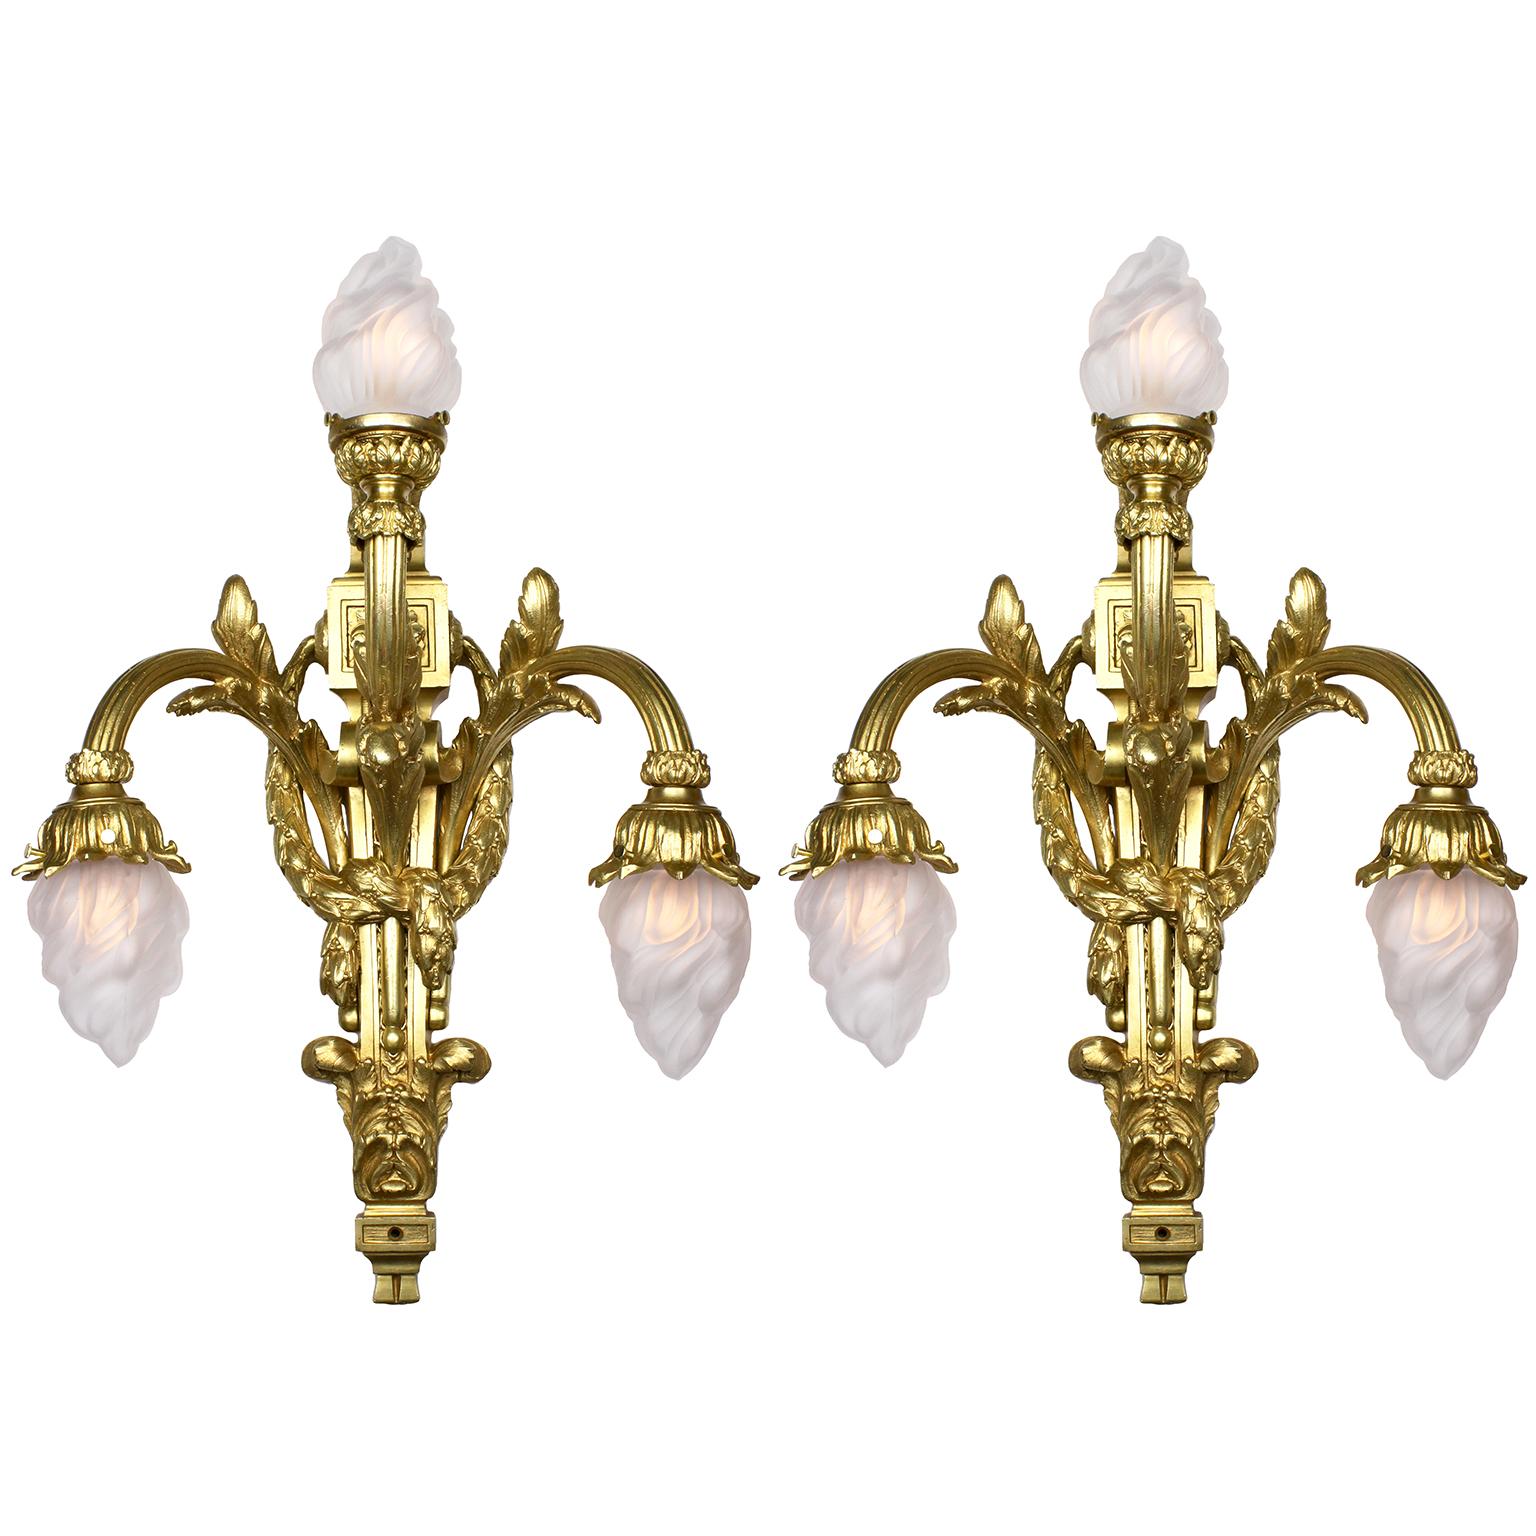 Early 20th Century Pair of French 19th/20th Century Empire Style 3-Light Gilt-Bronze Wall Sconces For Sale